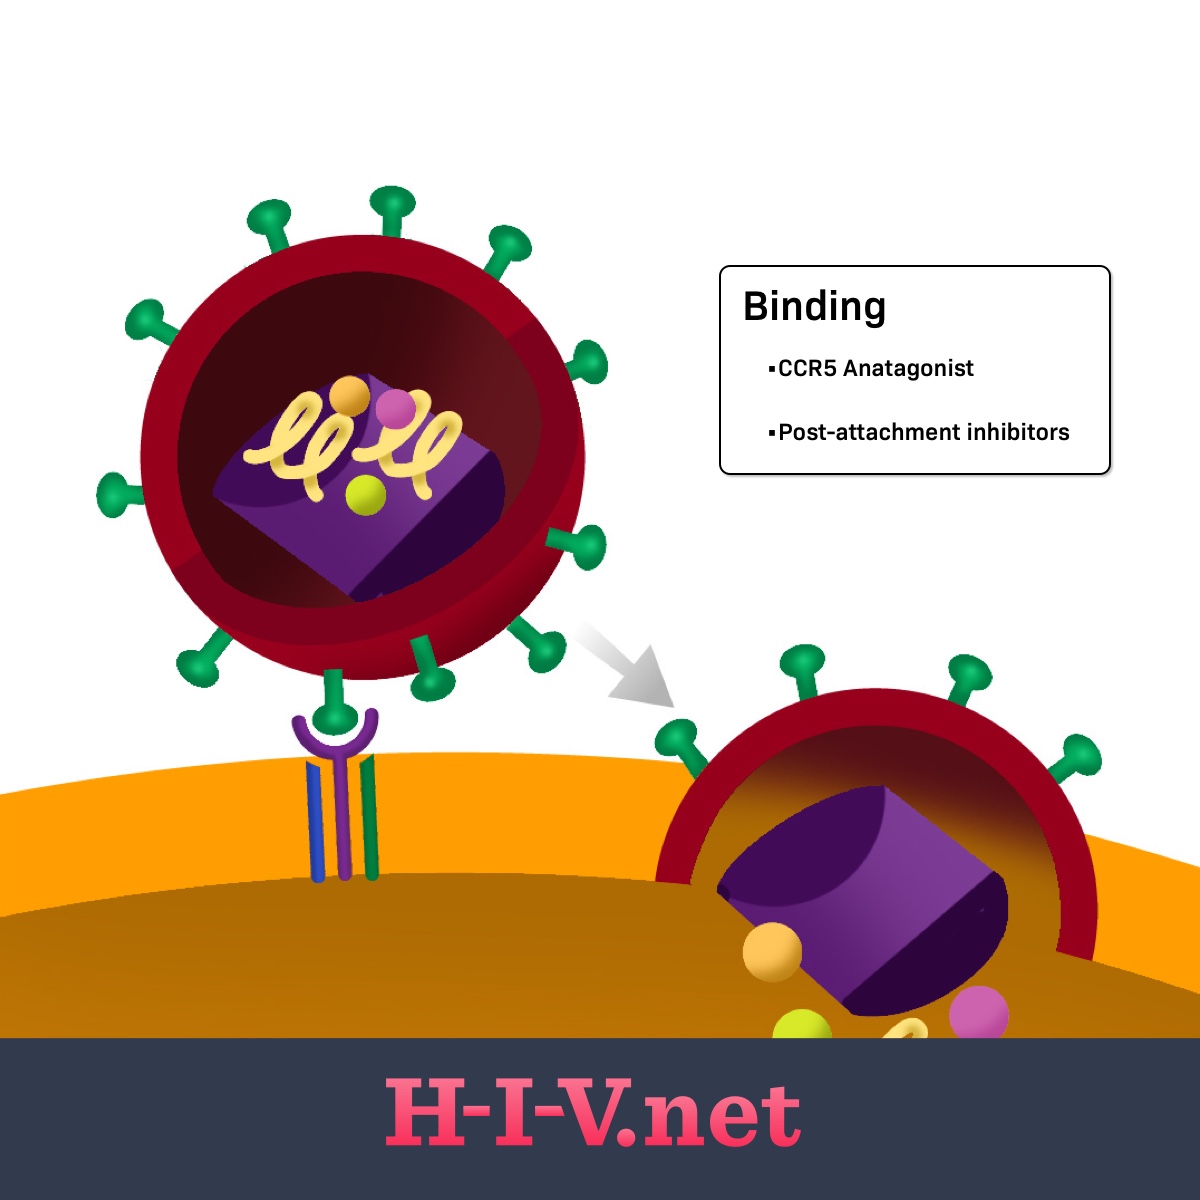 CCR5 antagonists targets binding in the HIV life cycle